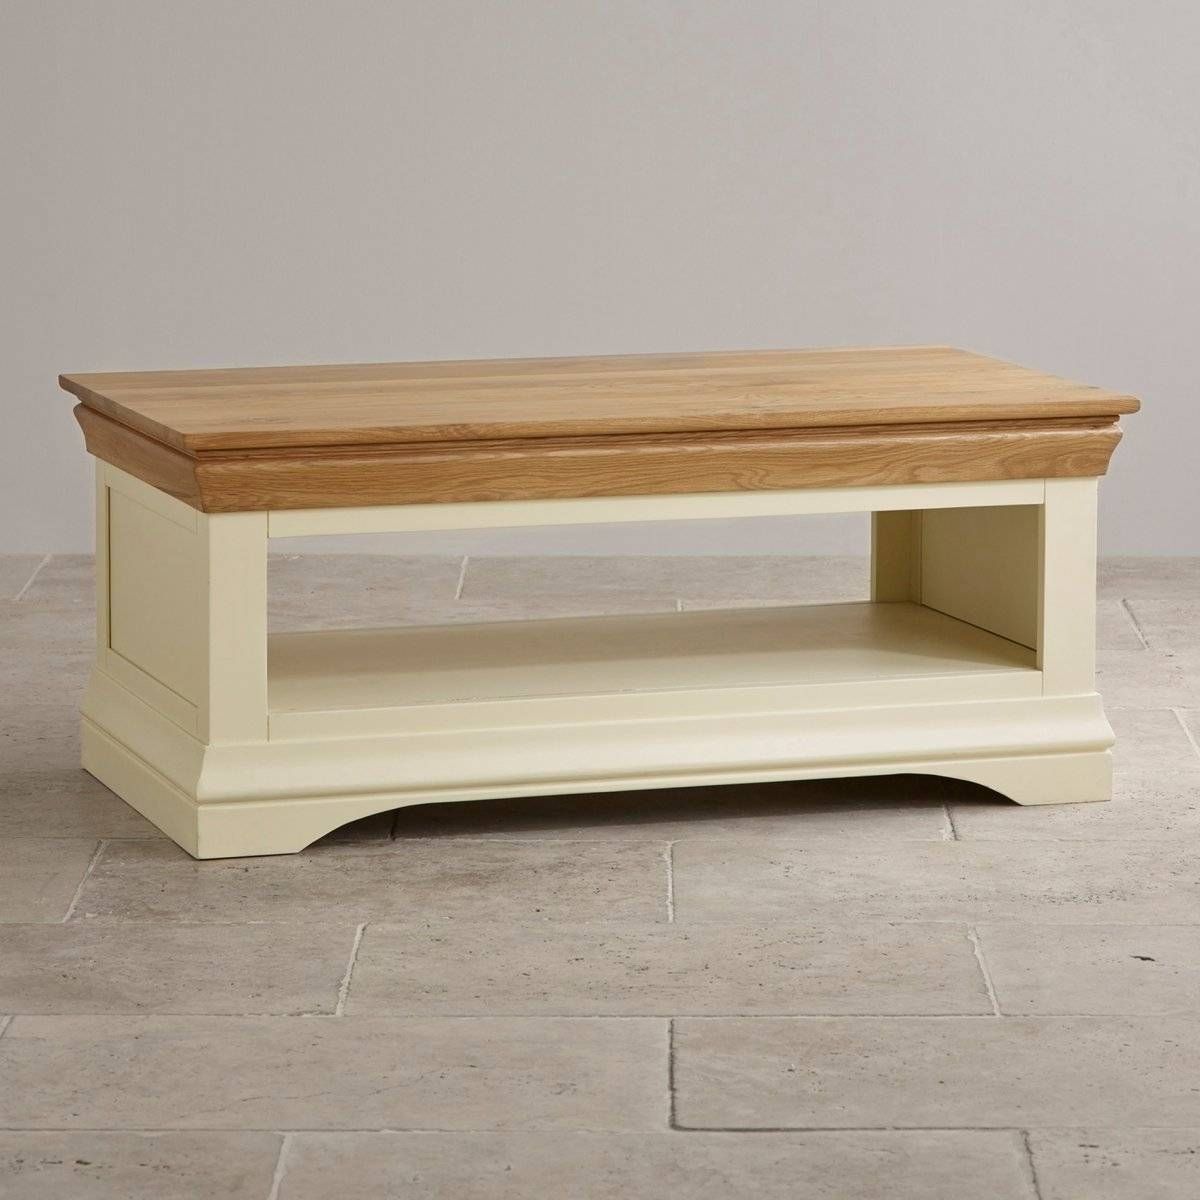 Coffee Tables | Free Delivery Available | Oak Furniture Land With Regard To Oak And Cream Coffee Tables (View 3 of 30)